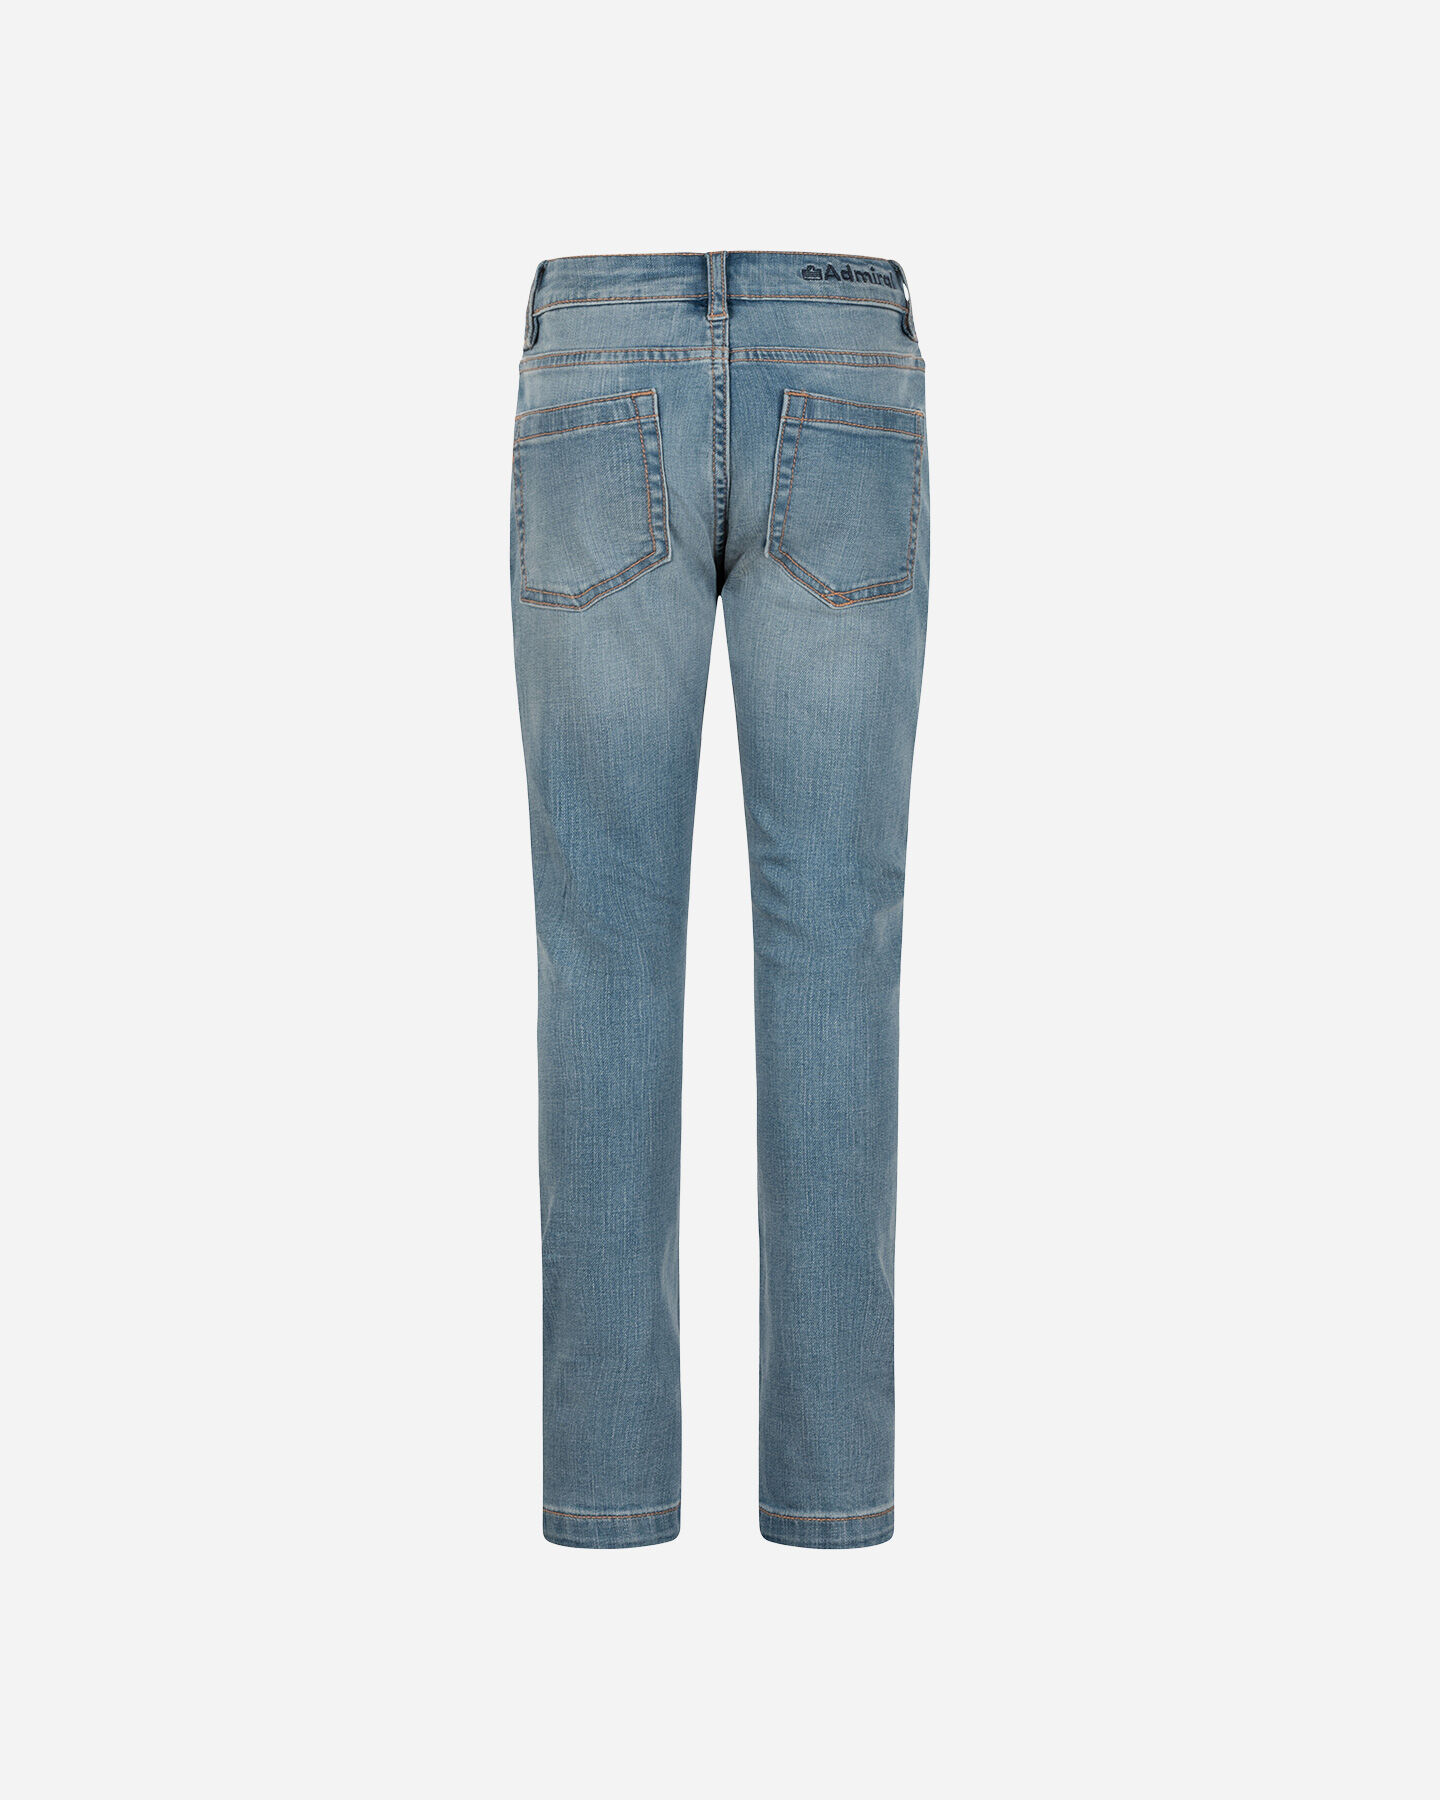  Jeans ADMIRAL LIFESTYLE JR S4130322|LD|6A scatto 1